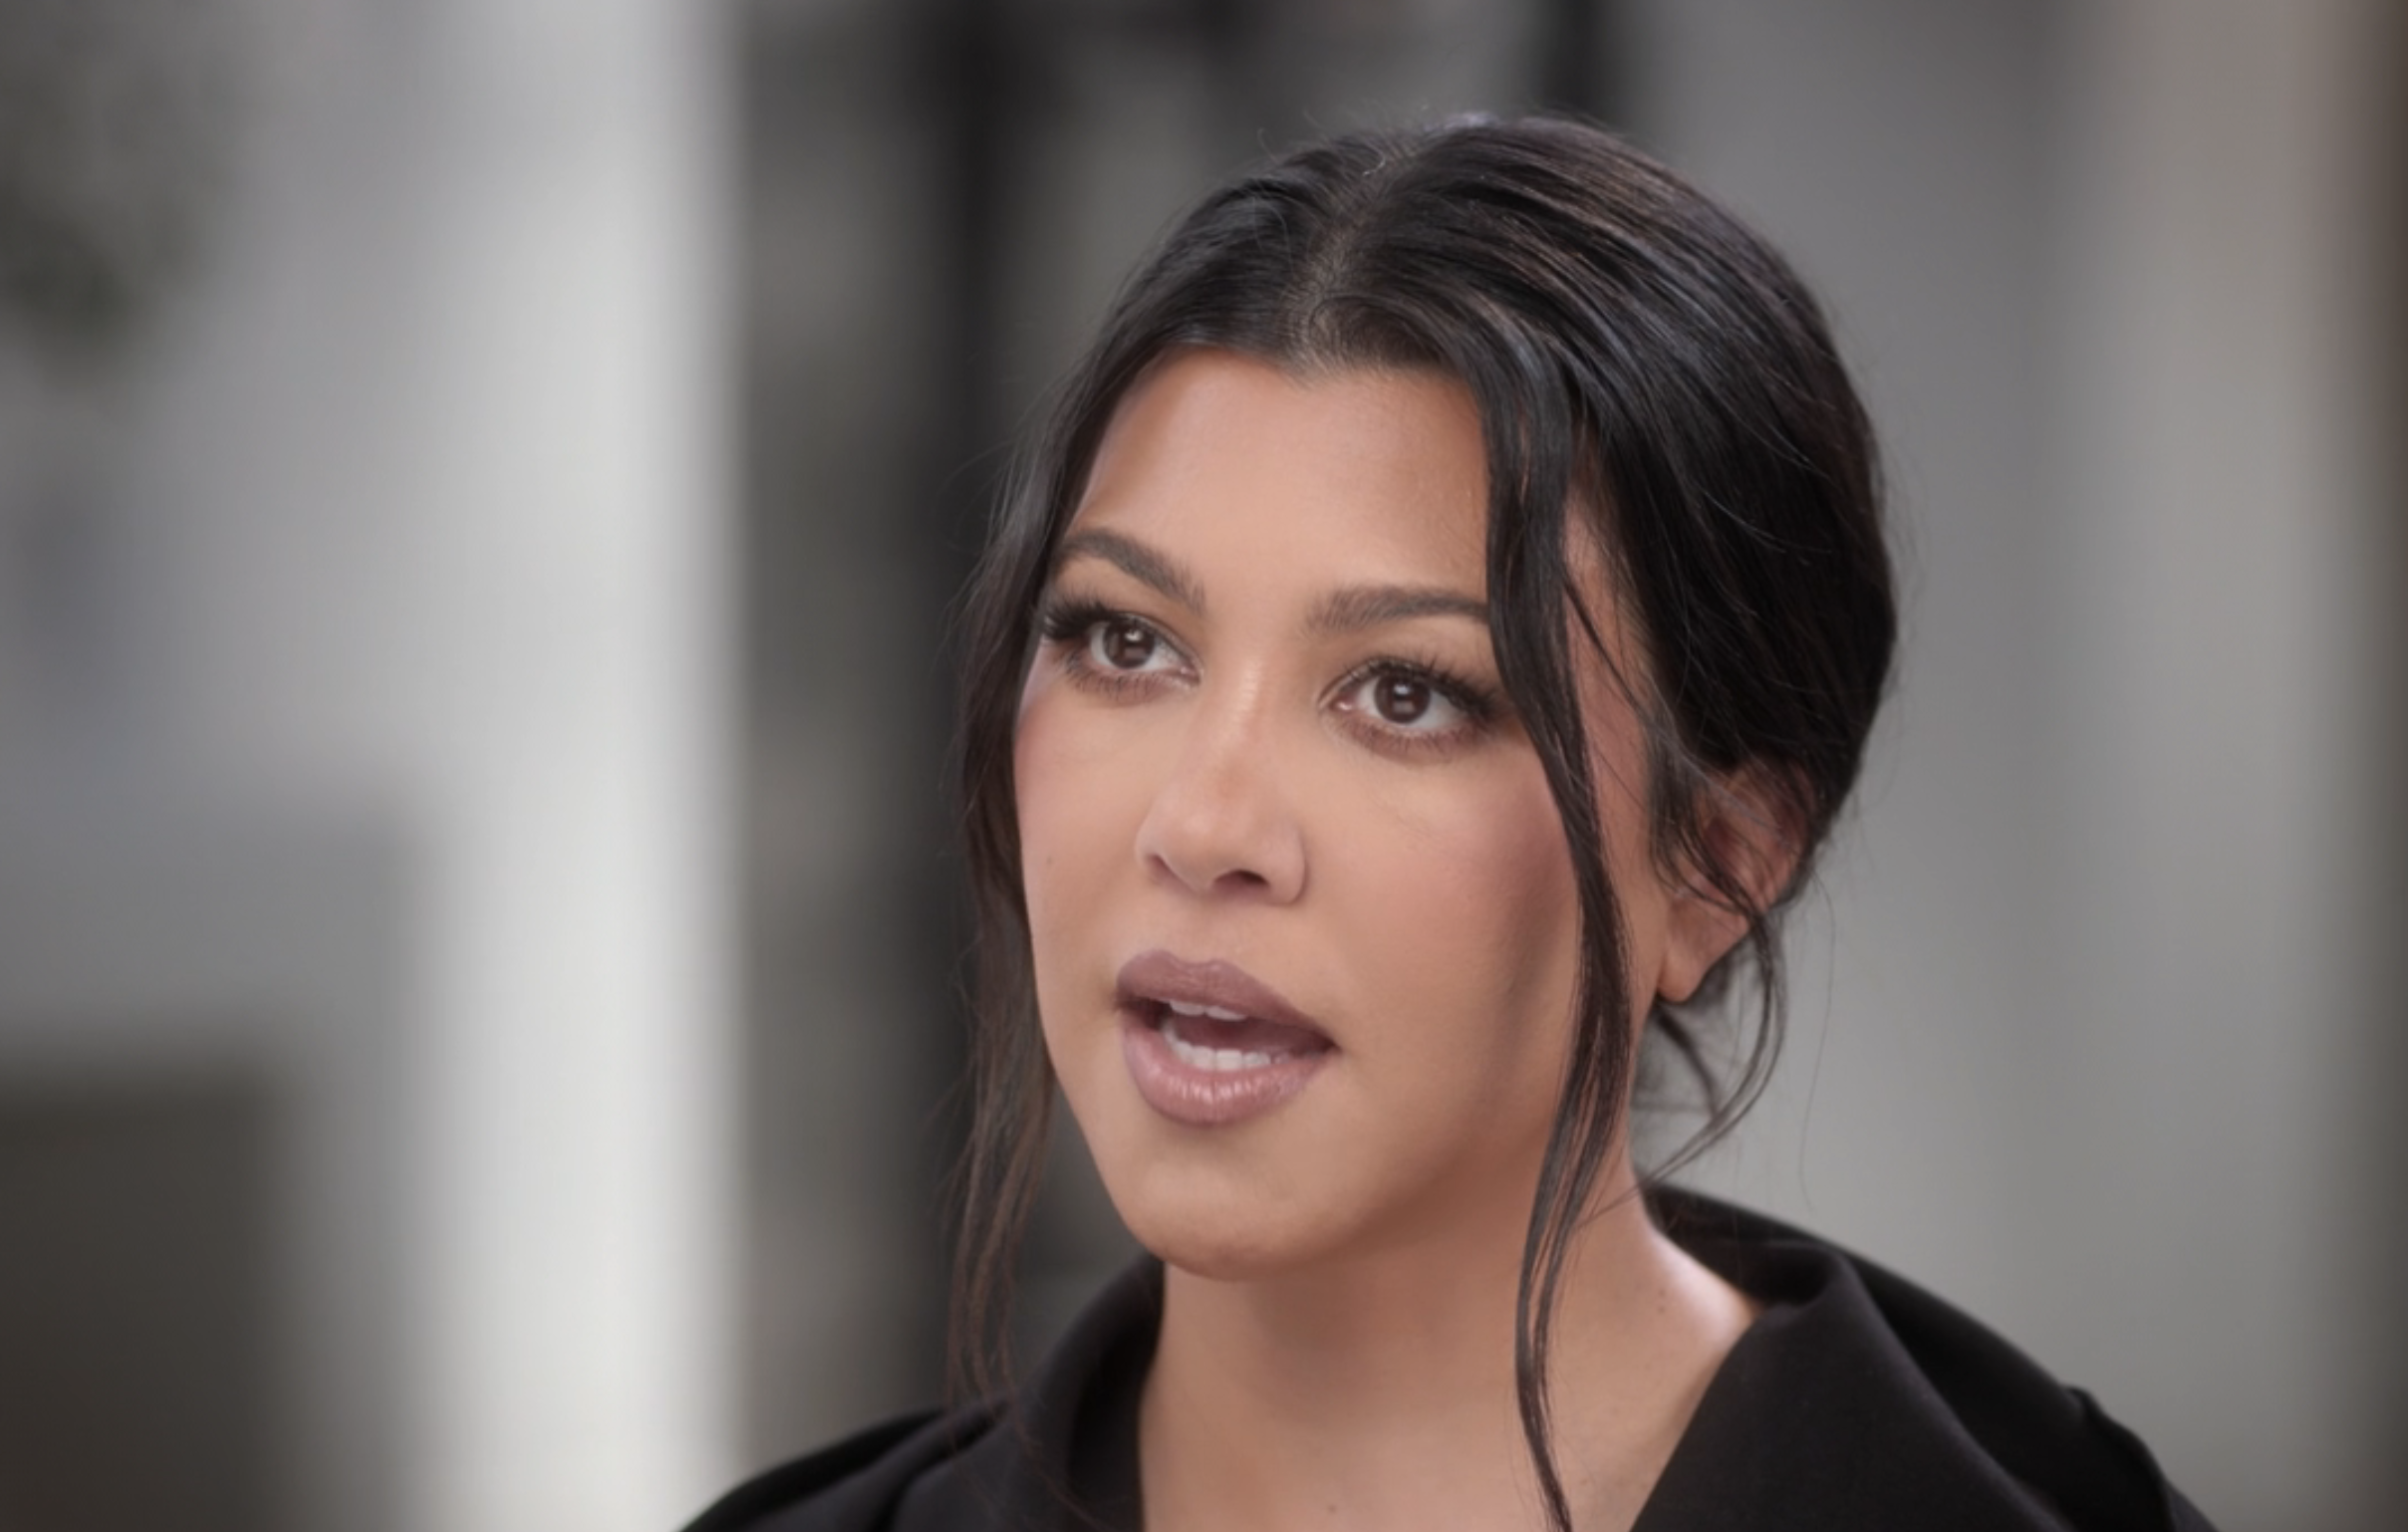 Kourtney Kardashian speaking in an interview setting, with a neutral expression and styled hair